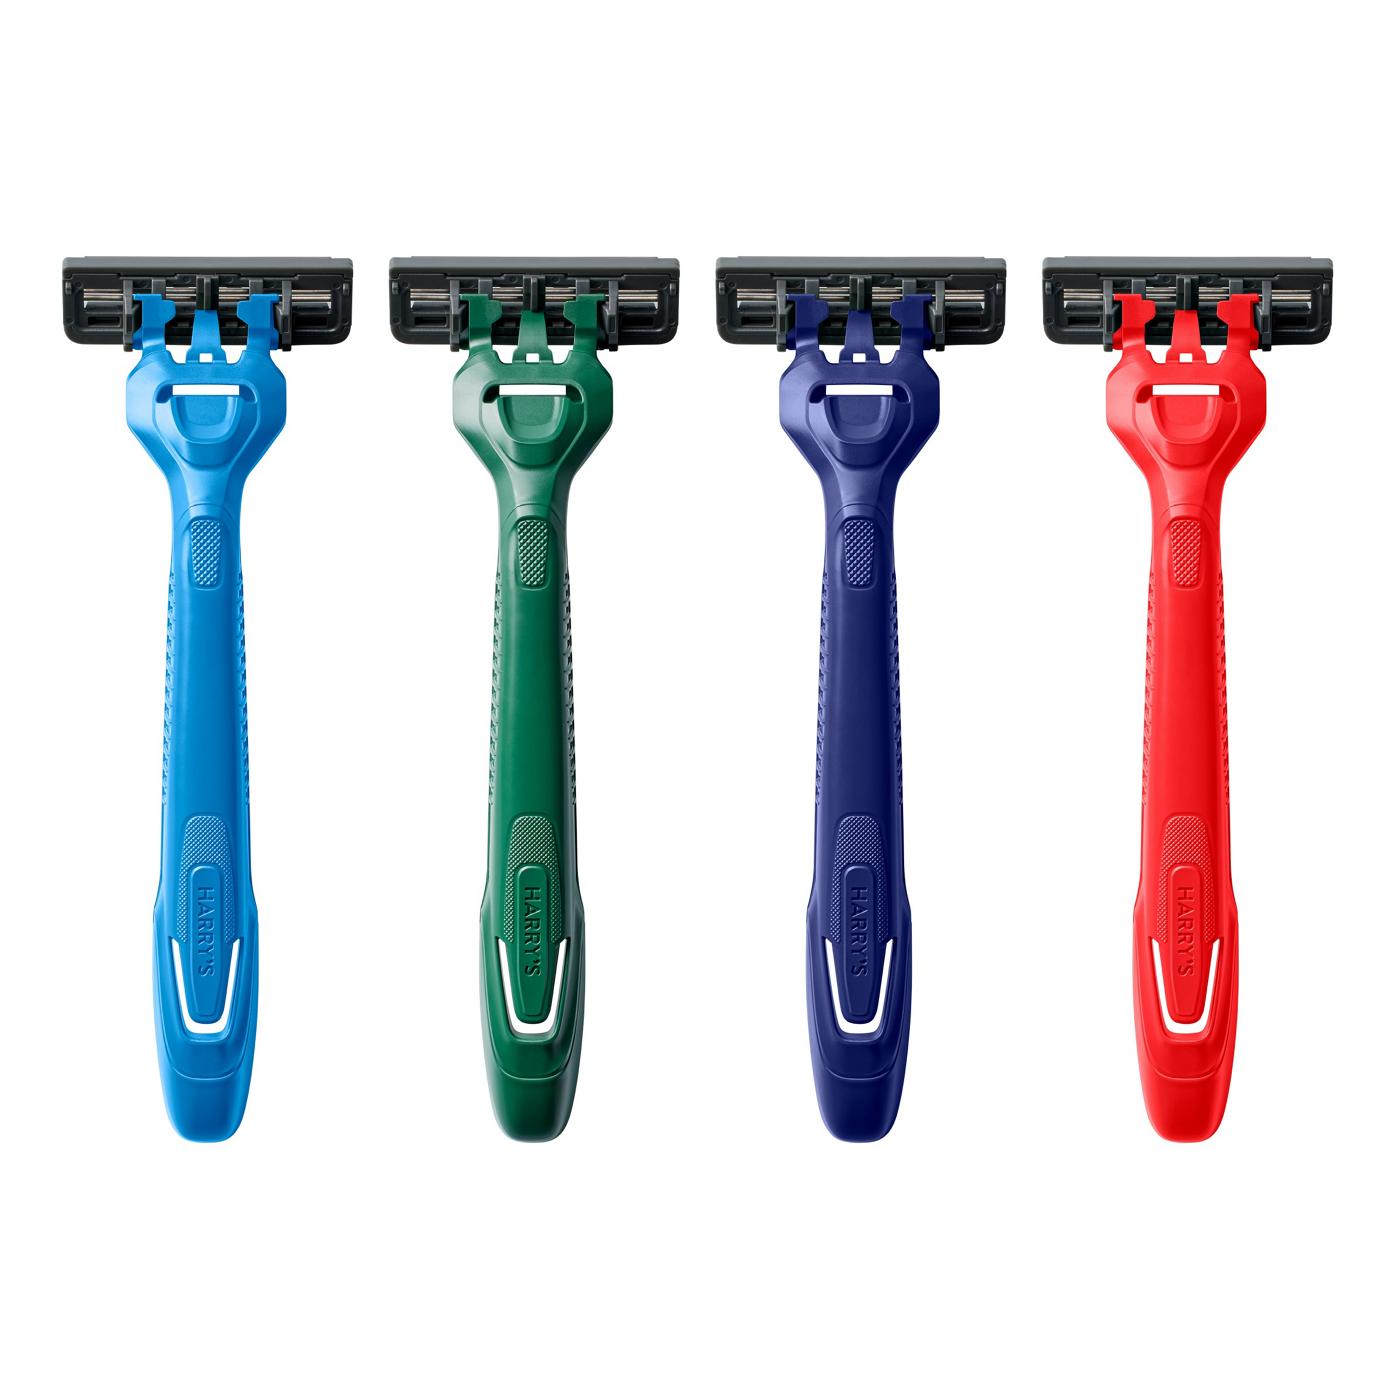 Harry's 3-Blade Disposable Razor Variety Pack; image 4 of 4